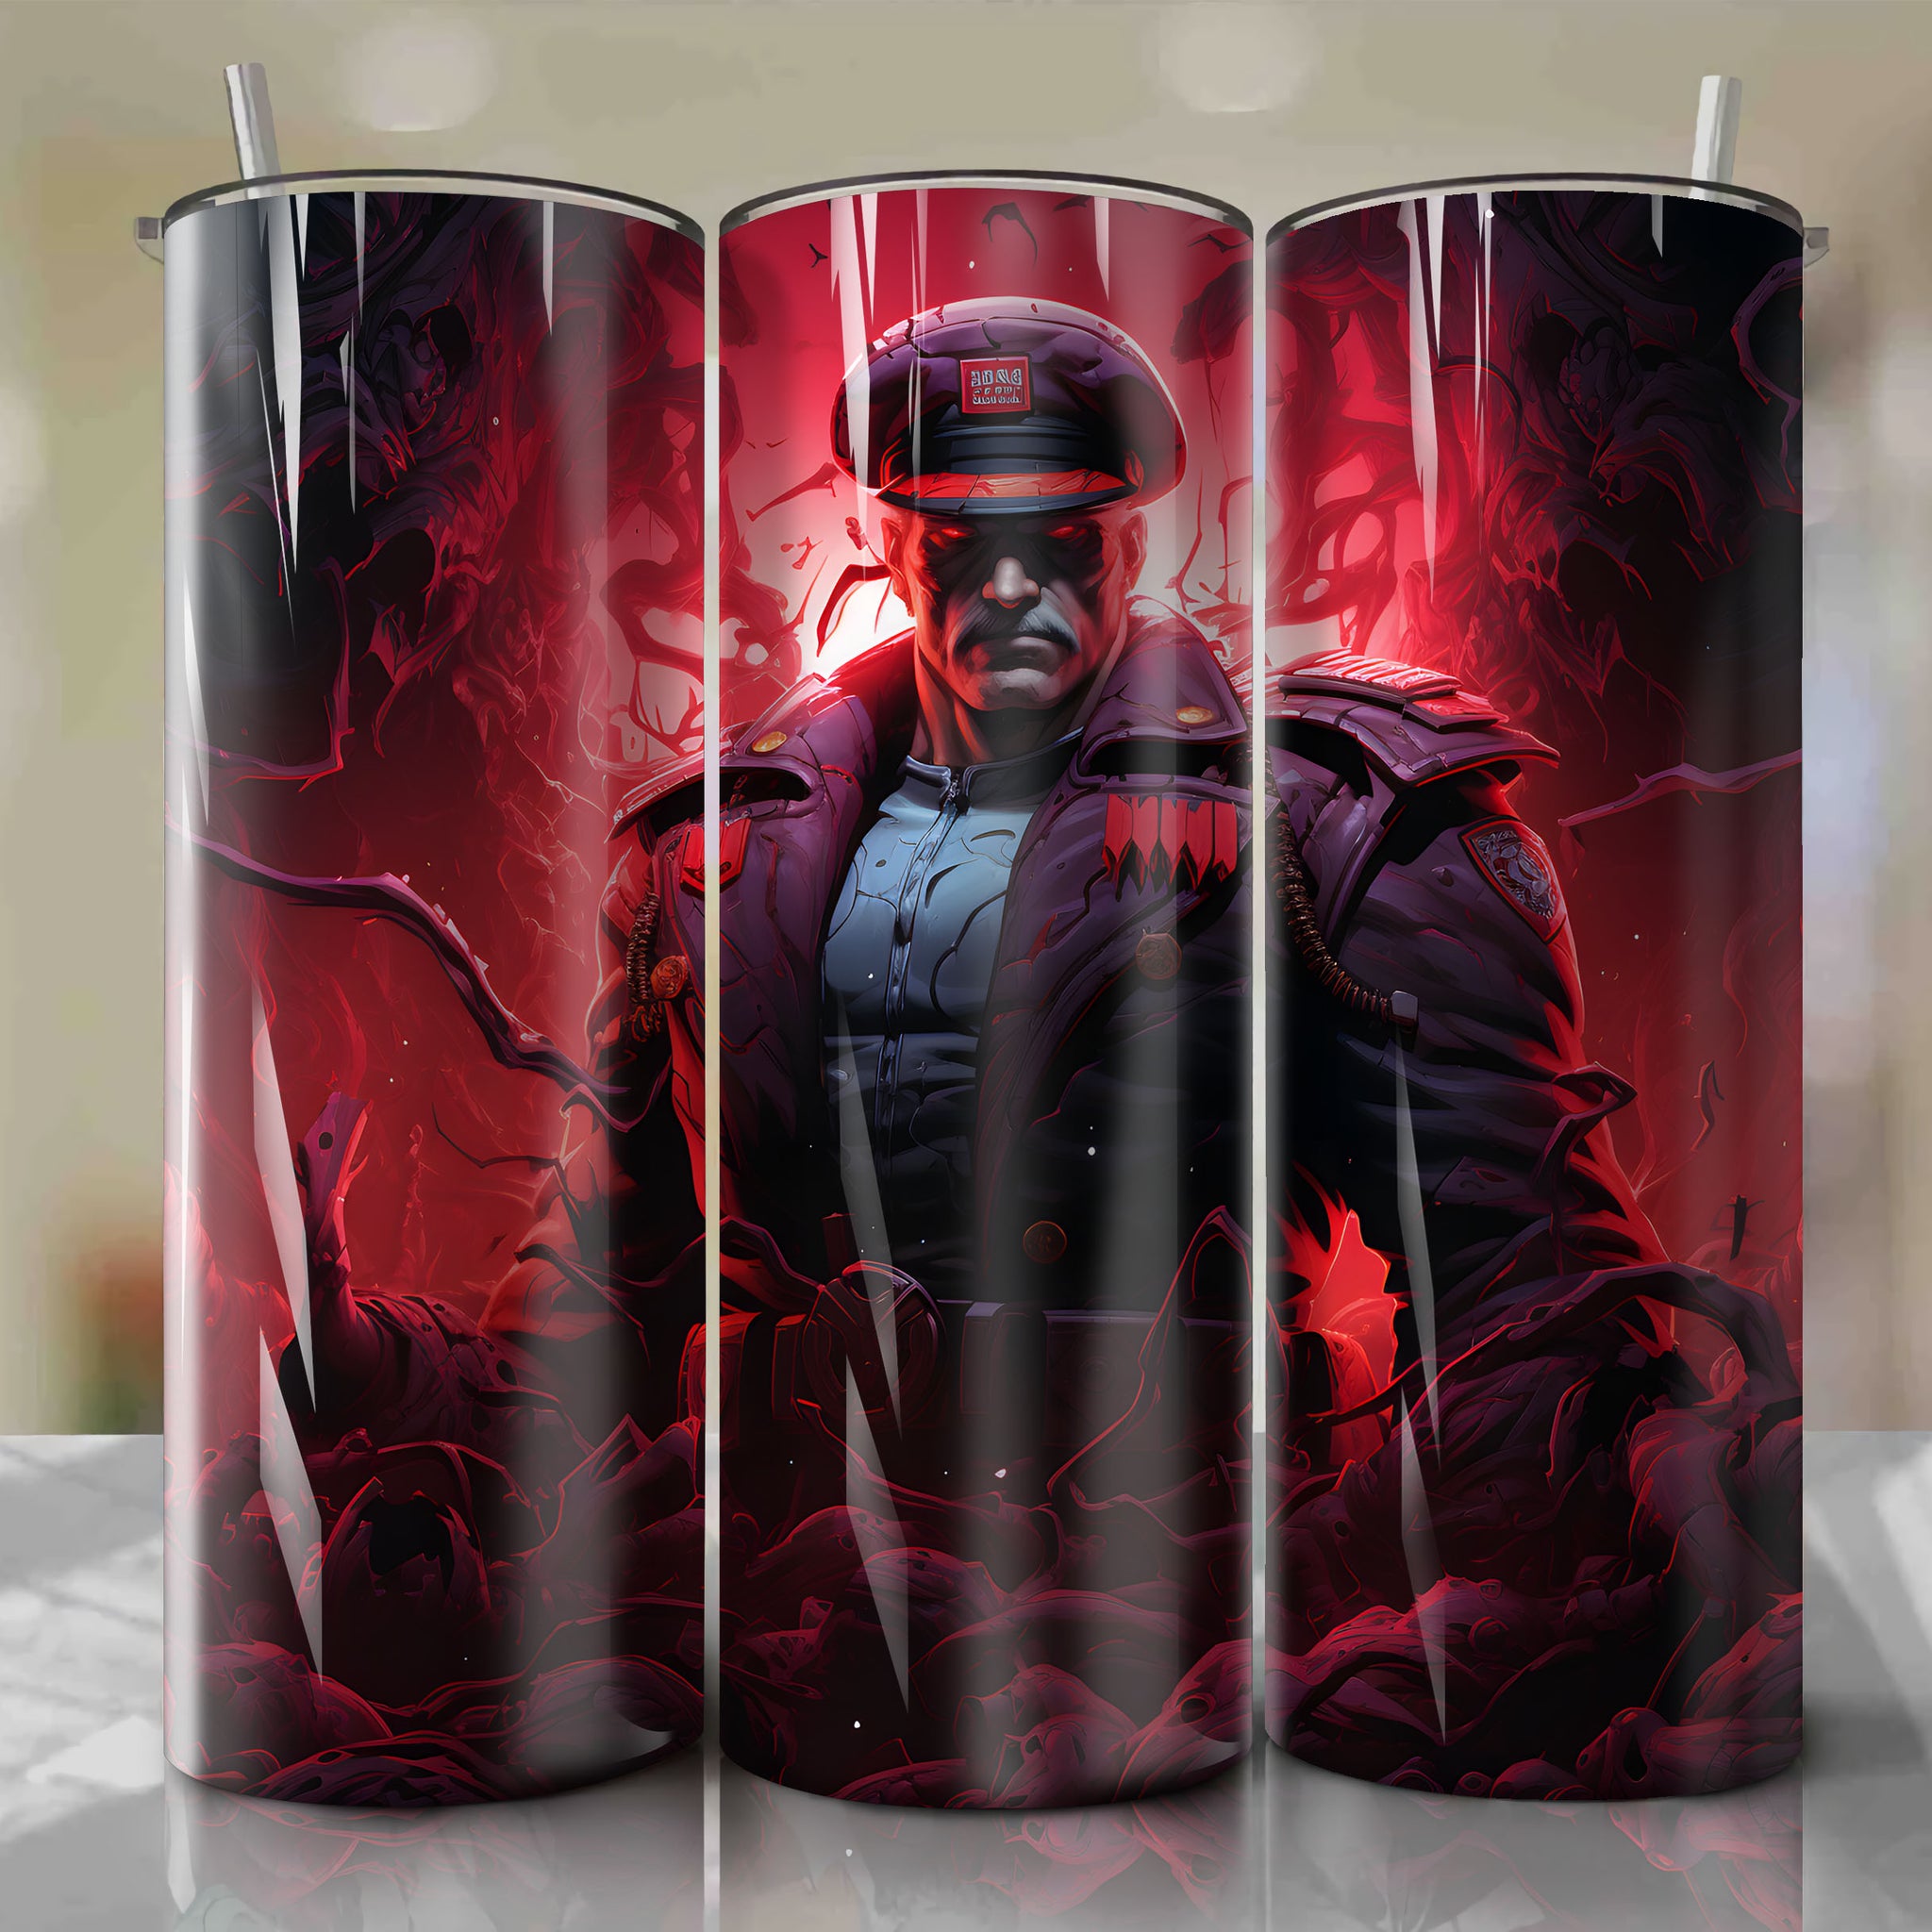 Powerful 20 Oz Tumbler Wrap - Inspired by M. Bison's Epic Emergence
